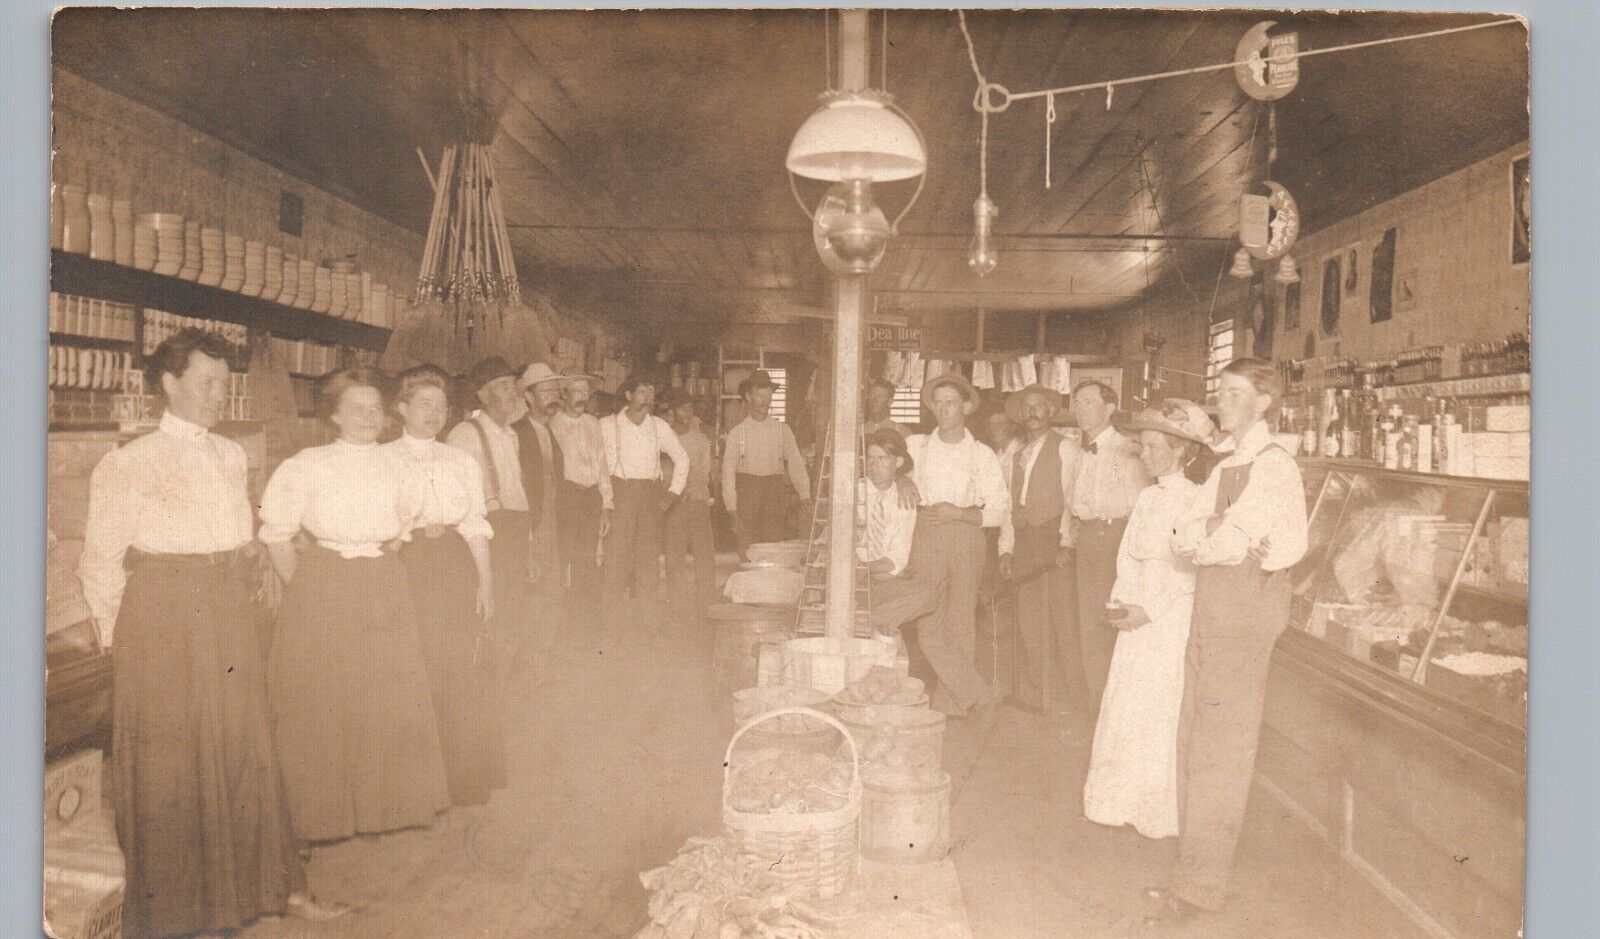 GENERAL STORE INTERIOR c1910 real photo postcard rppc and crowd of people